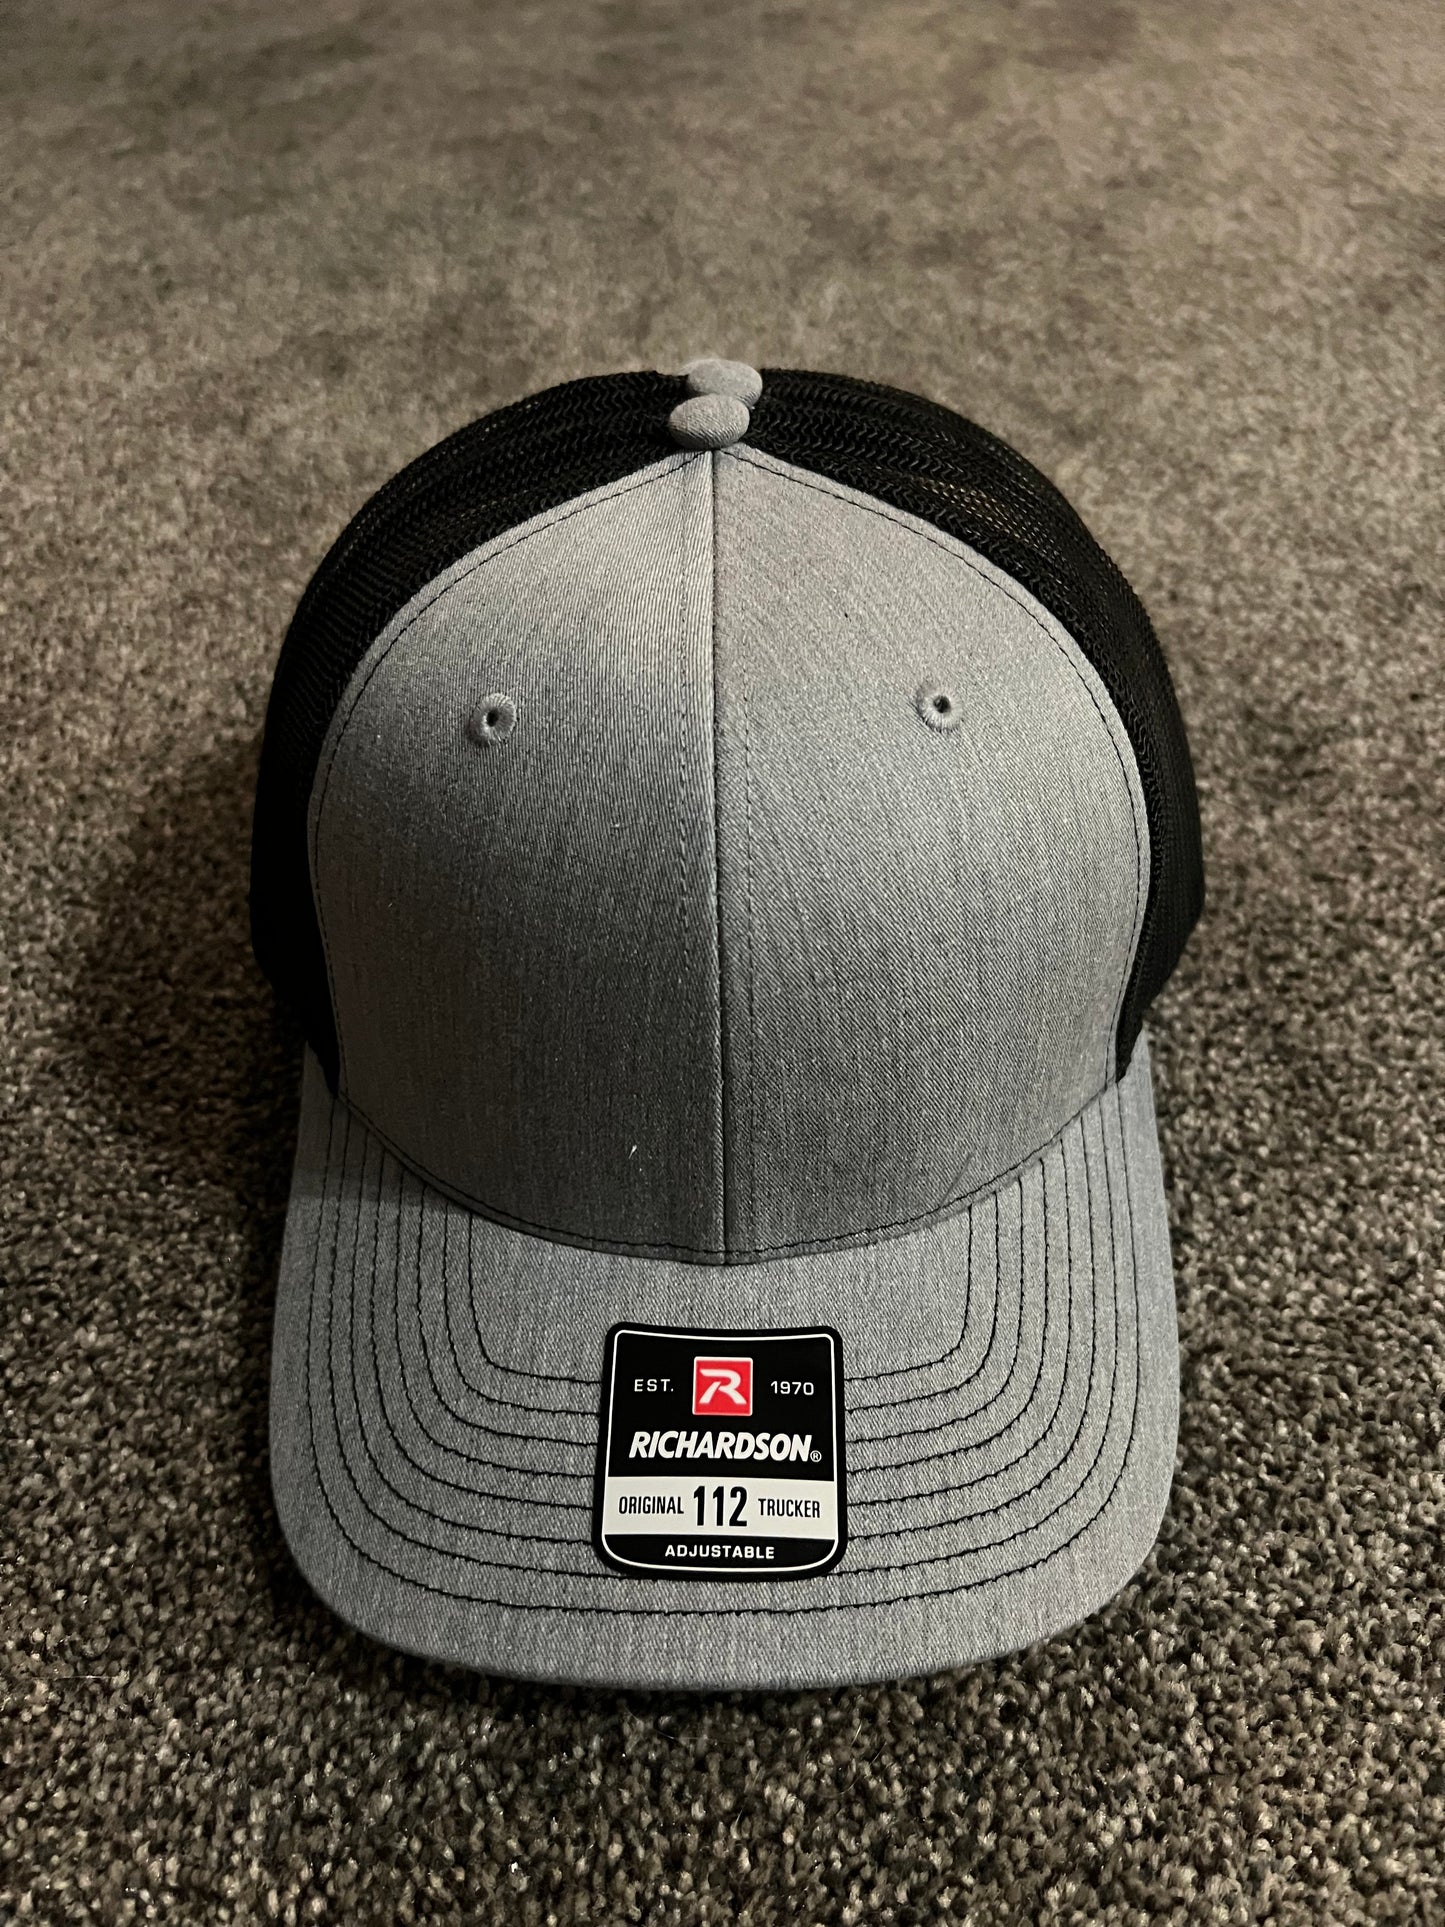 Overtime Hours BS Pay Embroidered Hat